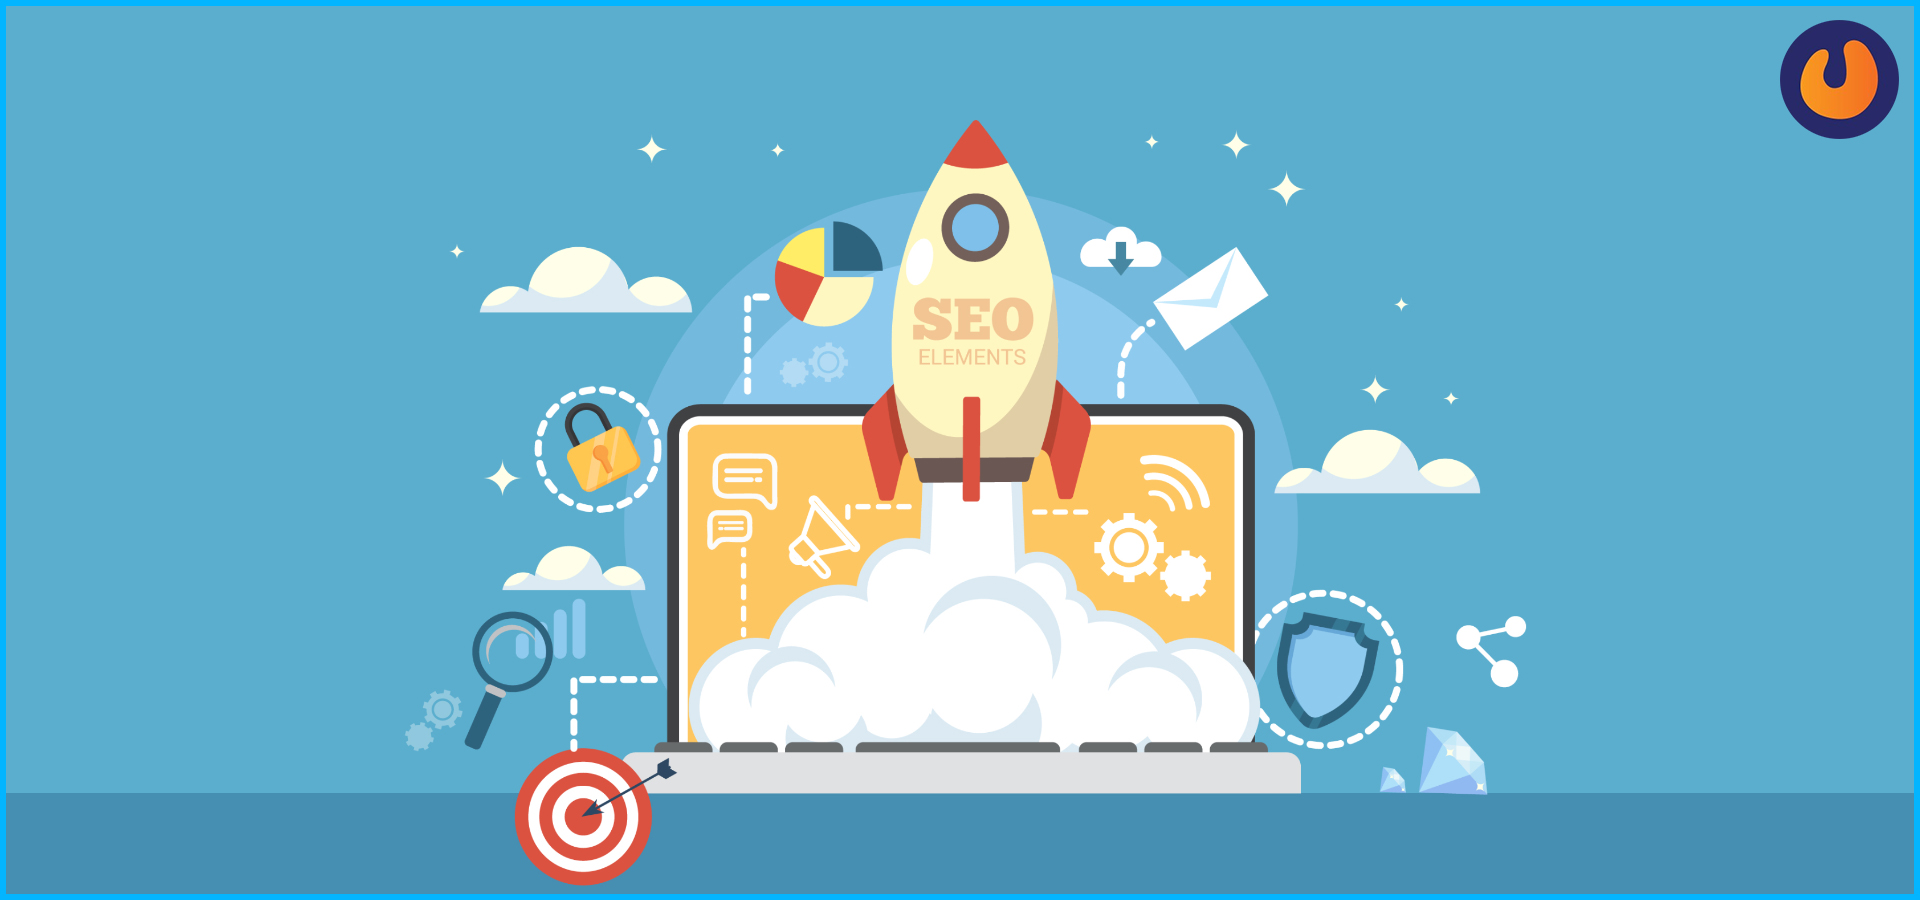 difference between enterprise SEO and small business SEO